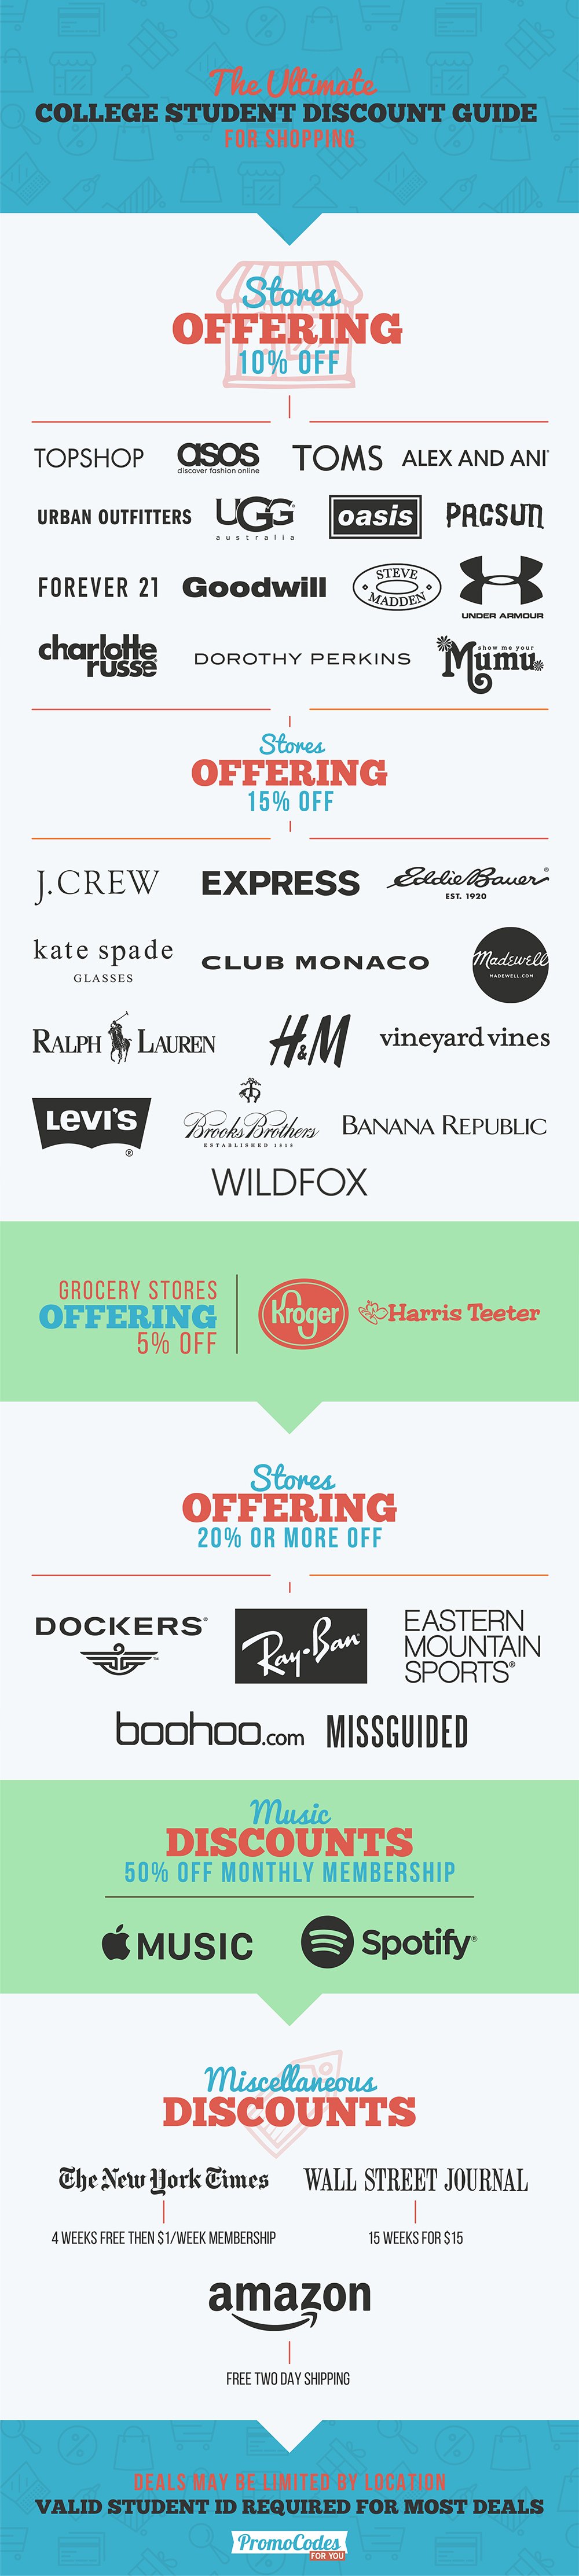 College Discount Guide for Shopping1 min